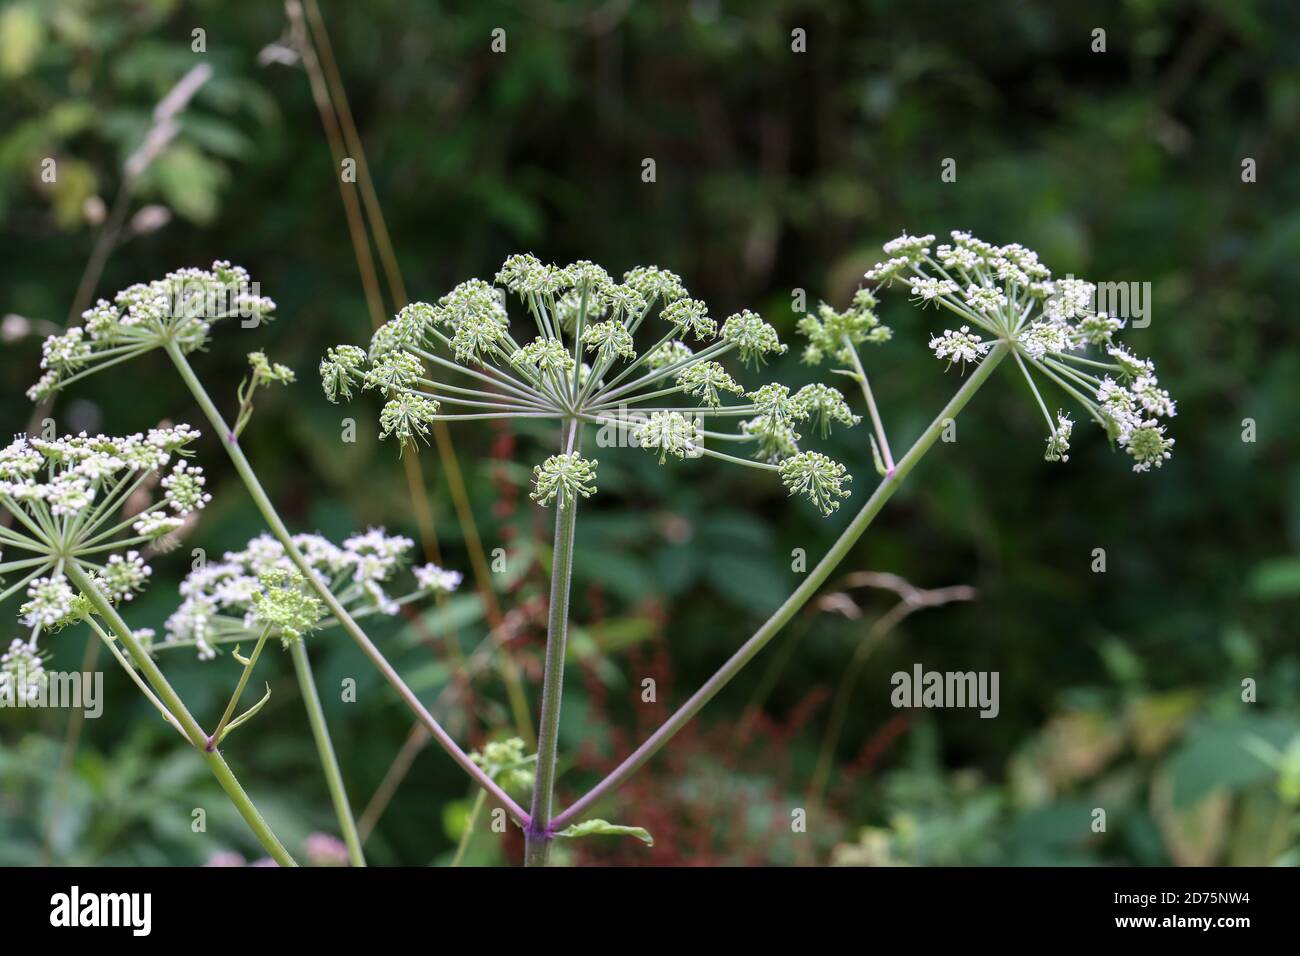 Closeup shot of white flowering plant caraway or meridian fennel on a blurred background Stock Photo